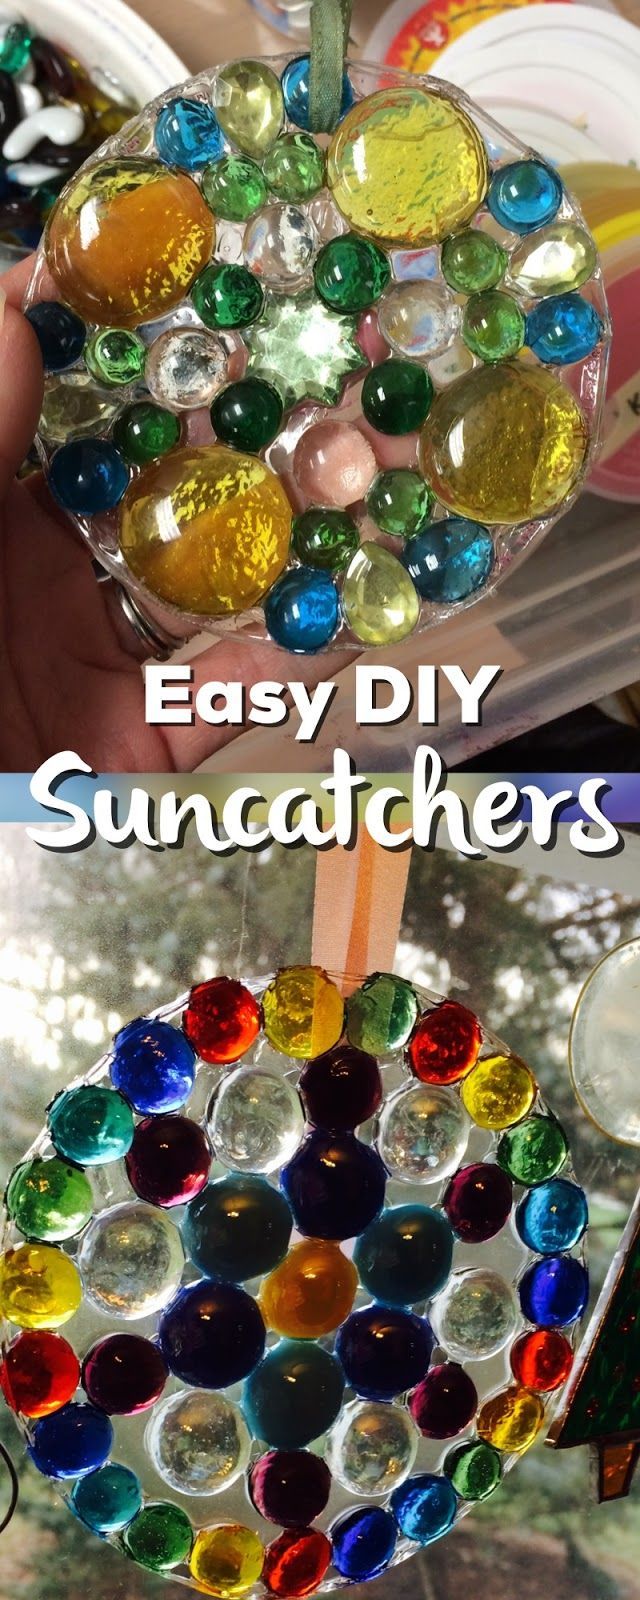 Easy DIY suncatchers- all you need is glue, a plastic lid and some gems! Instant gift!